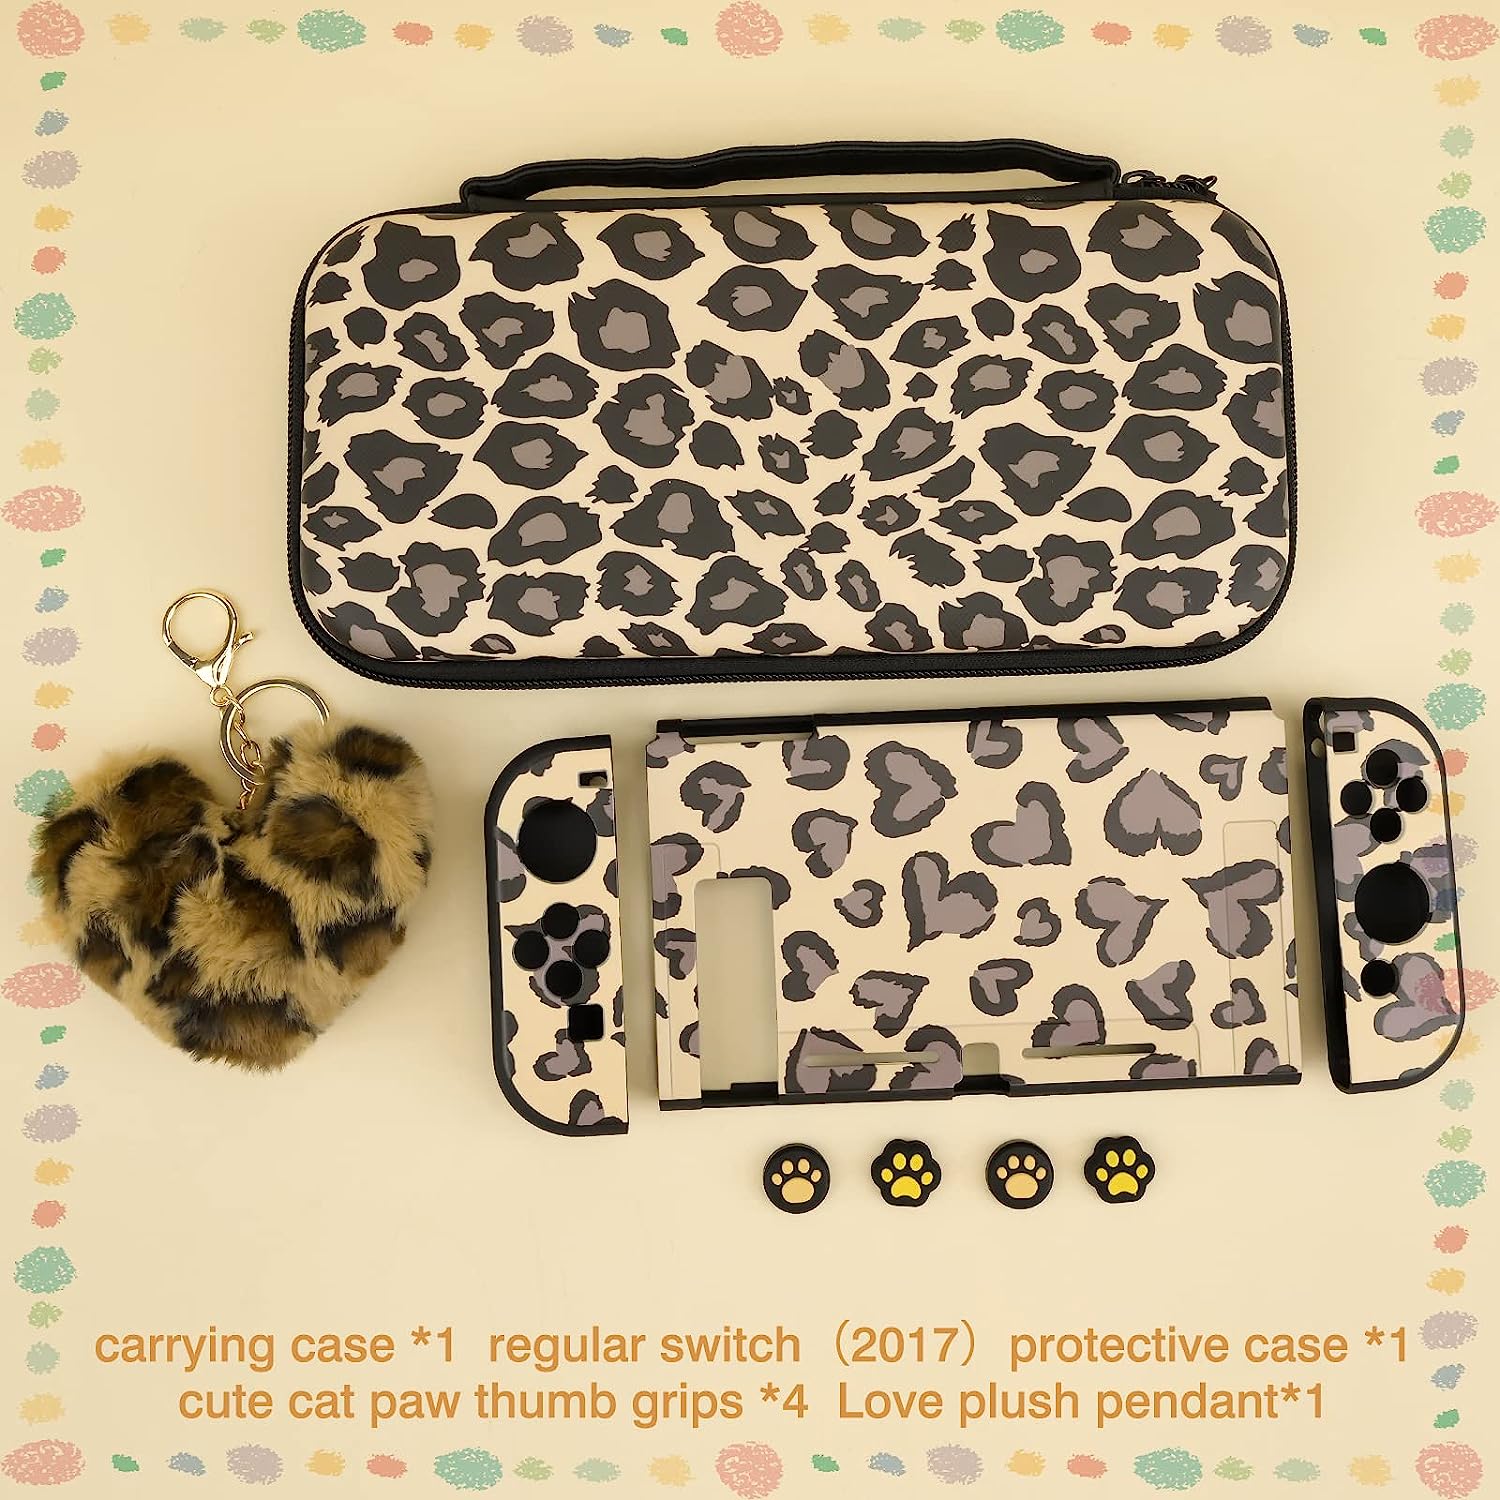 DLseego Brown Love Leopard Carrying Case for Switch، Cute Silicone Protective Case Soft Cover with 4PCS Thumb Grip Caps اور Brown Plush Heart Pendant Hard Storage Case Accessories کٹ بنڈل لڑکیوں کے لیے